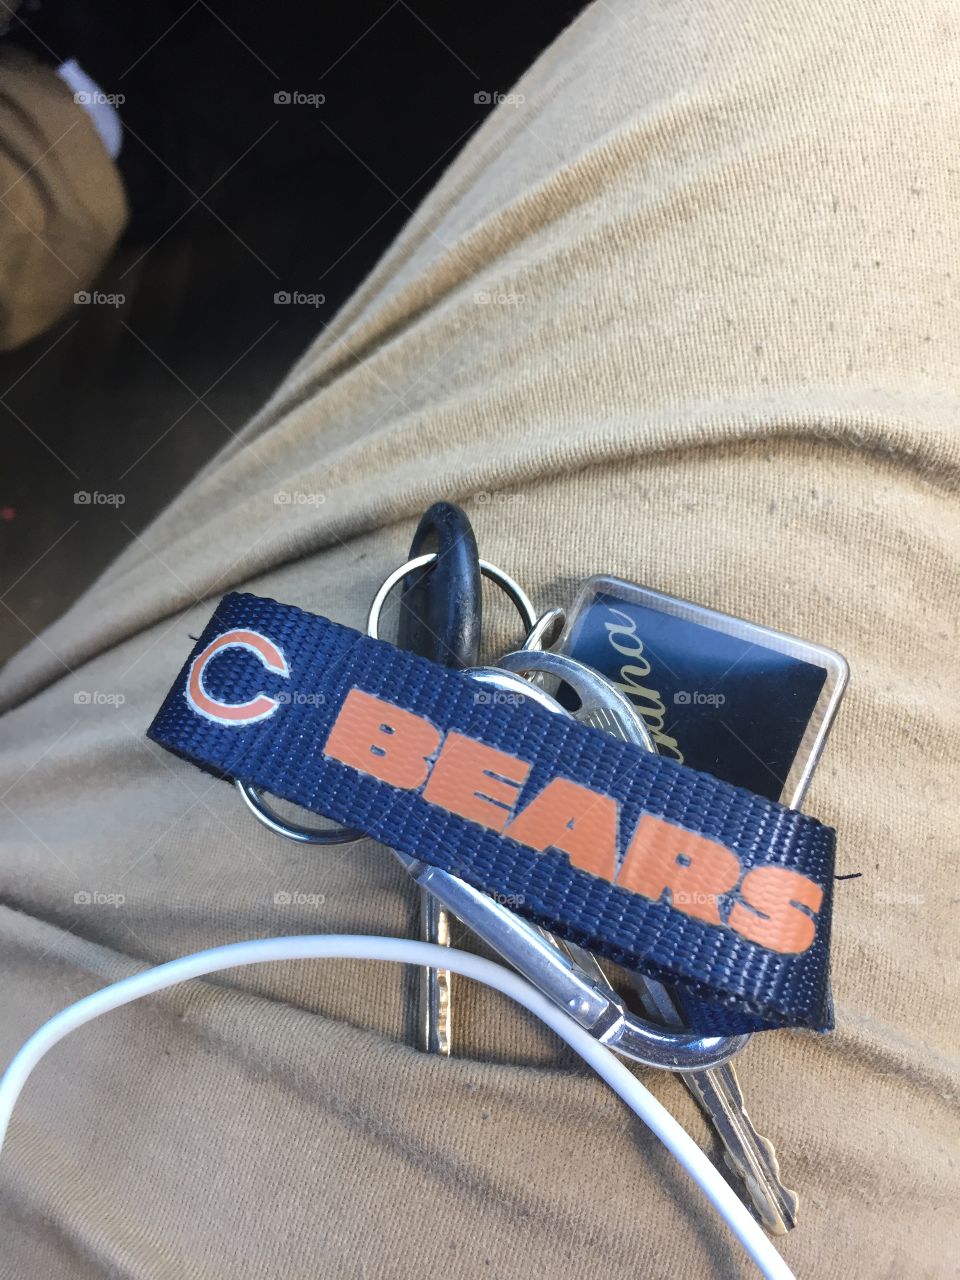 Chicago Bears Key Chain with keys attached